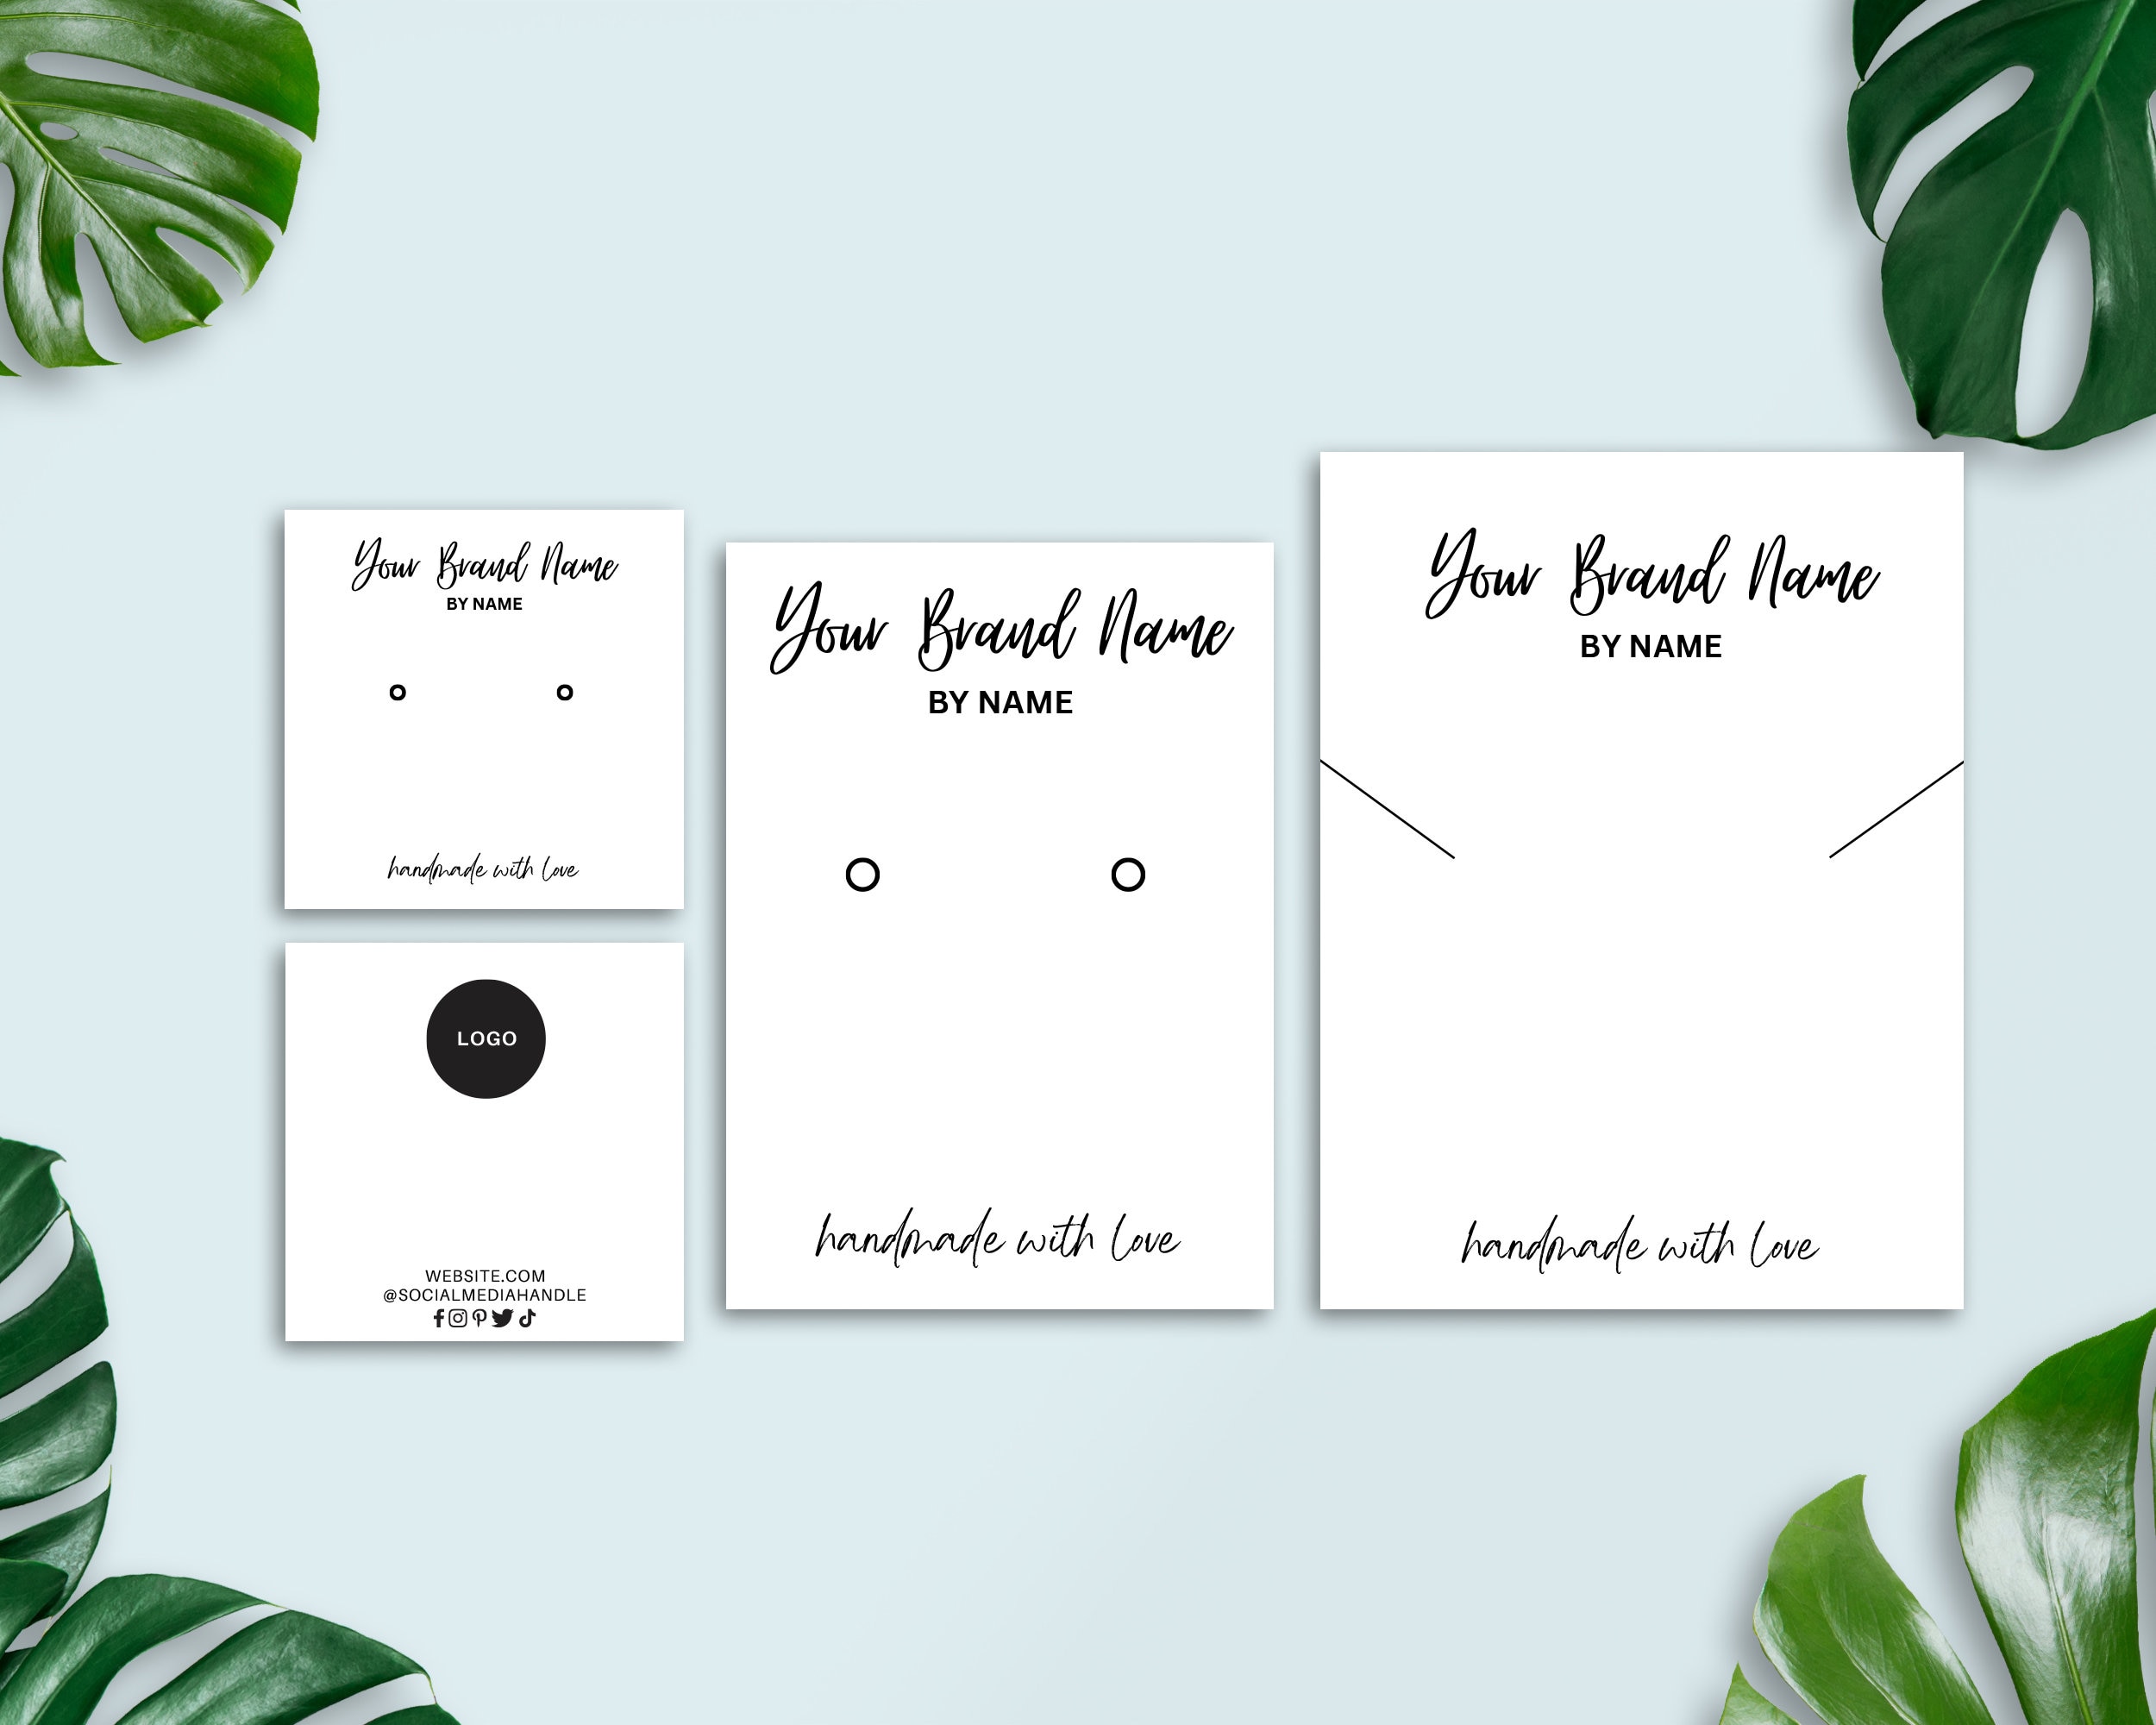 Editable Jewelry Display Card Template Canva, Printable Earrings Display  Cards, Custom Necklace Holder, Bracelet Display Label Cards Set 